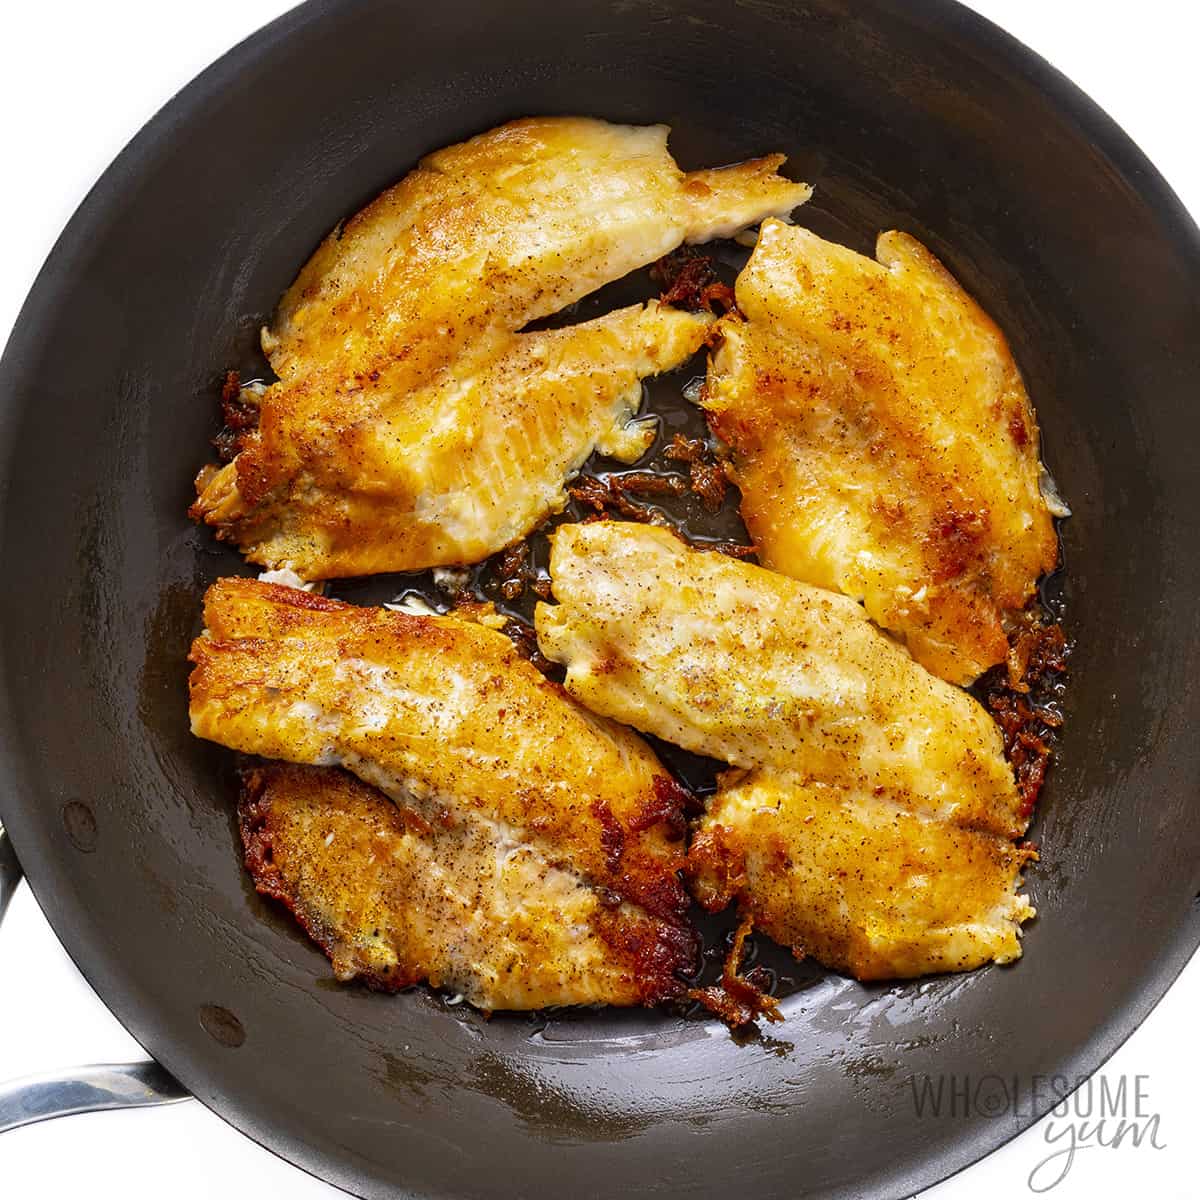 Fillets crisping in a pan.